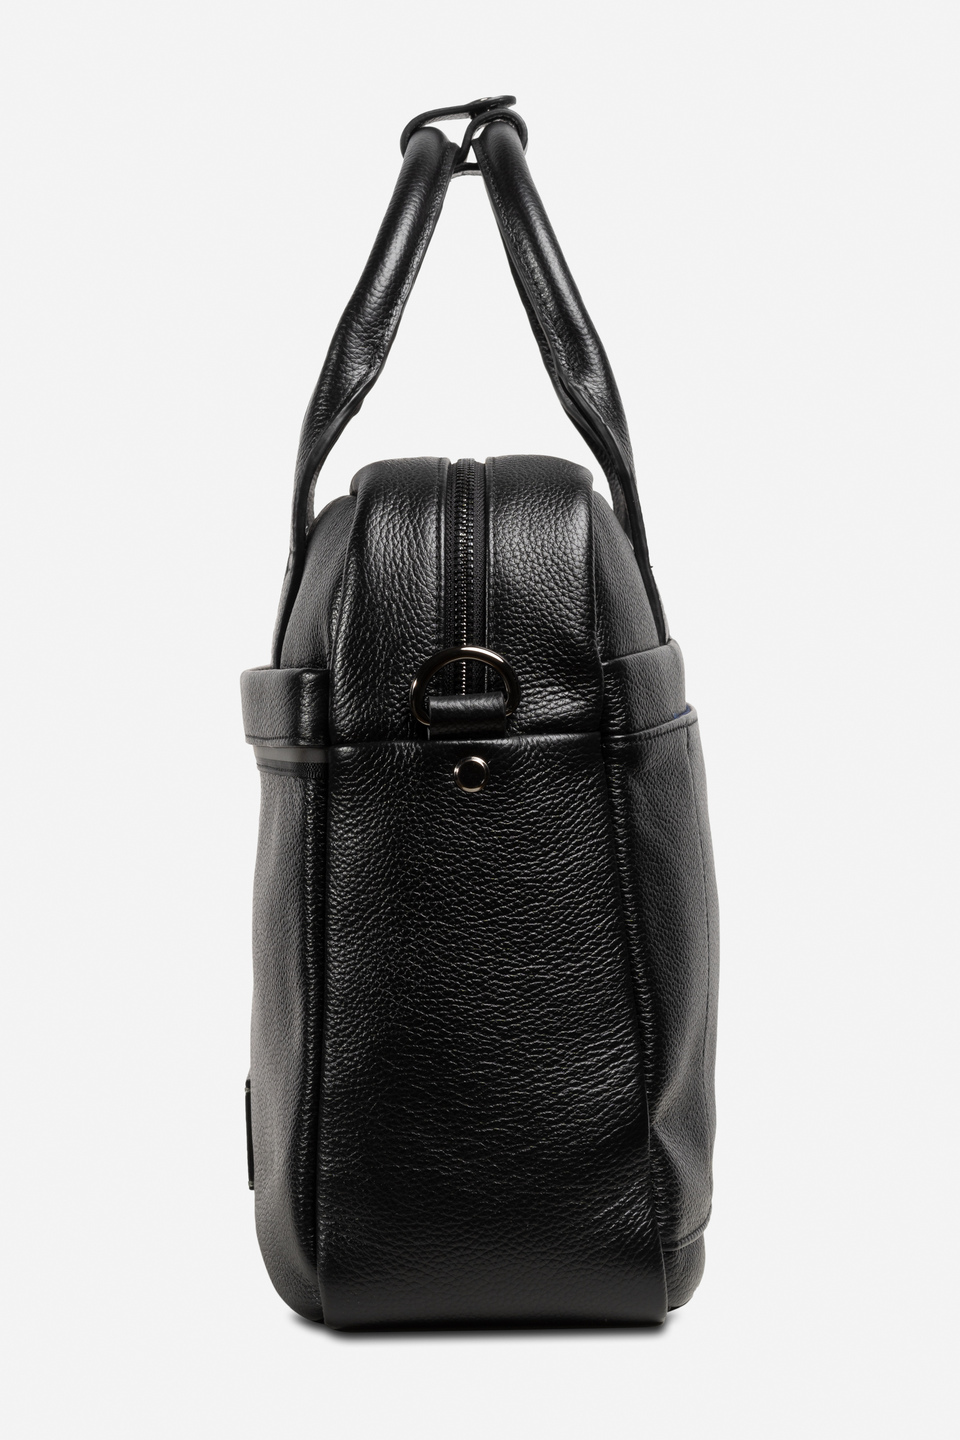 Backpack in calf leather | La Martina - Official Online Shop